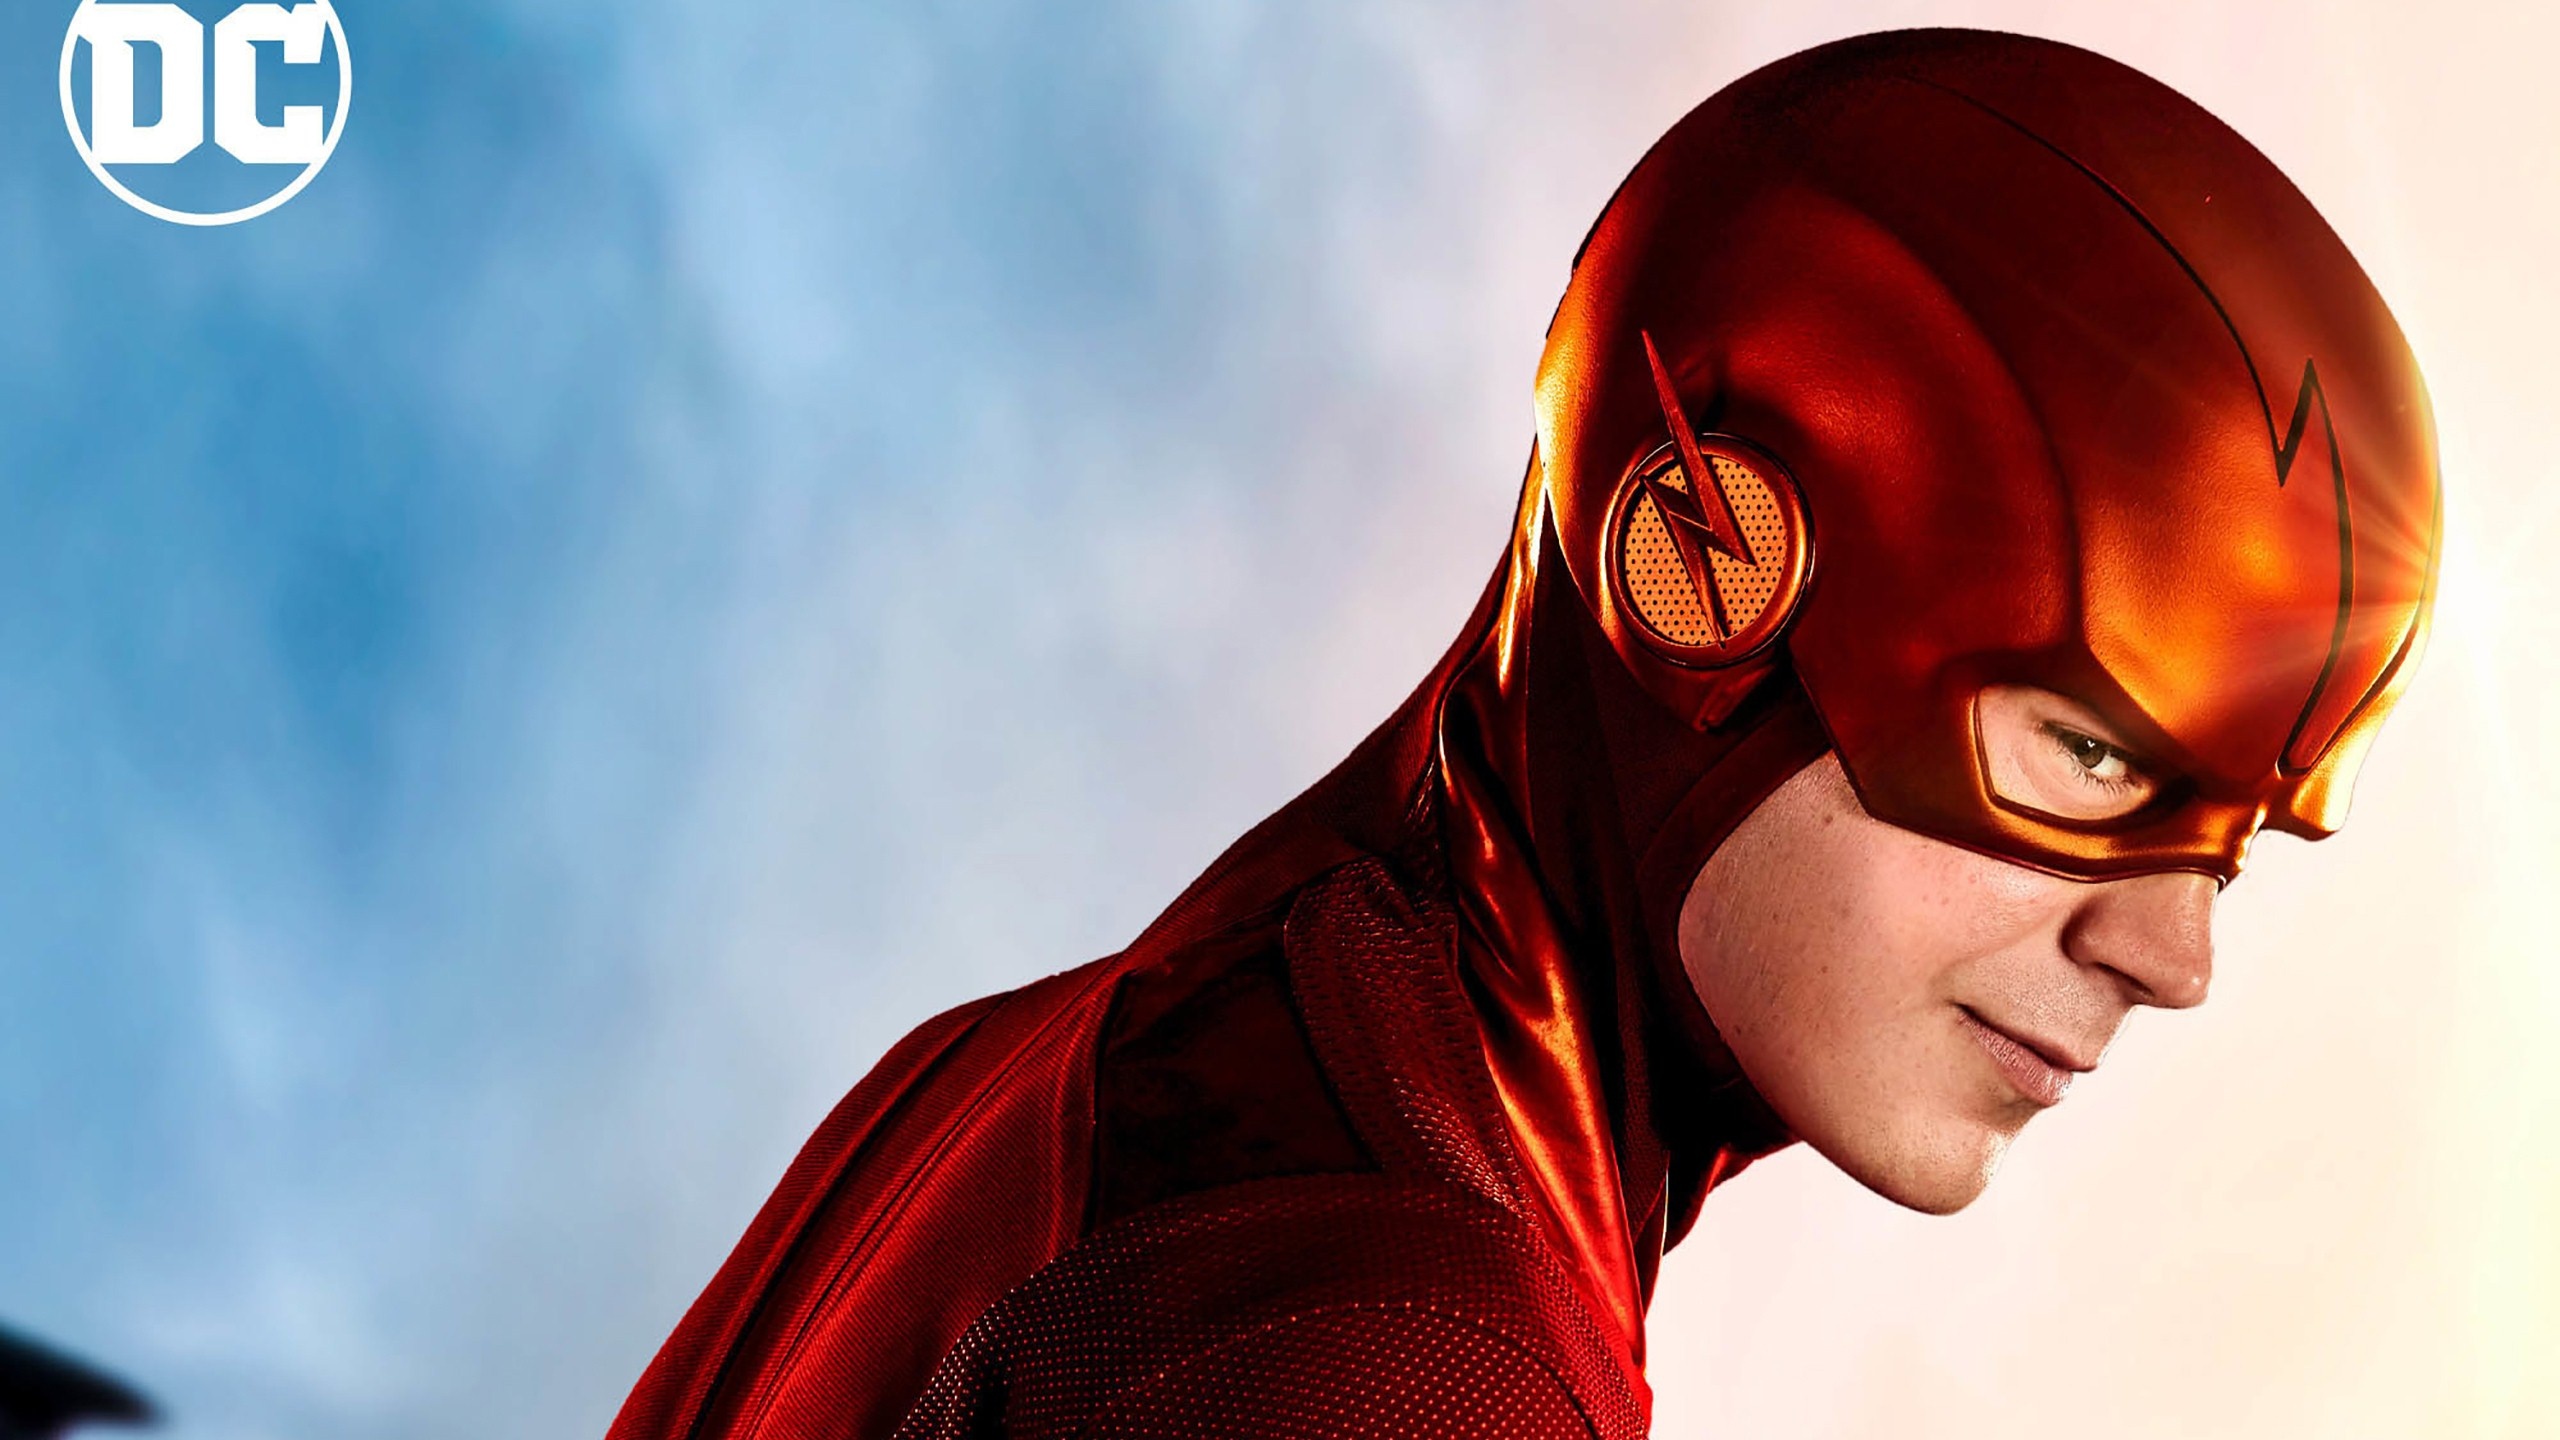 The Flash Wallpapers 2560x1440